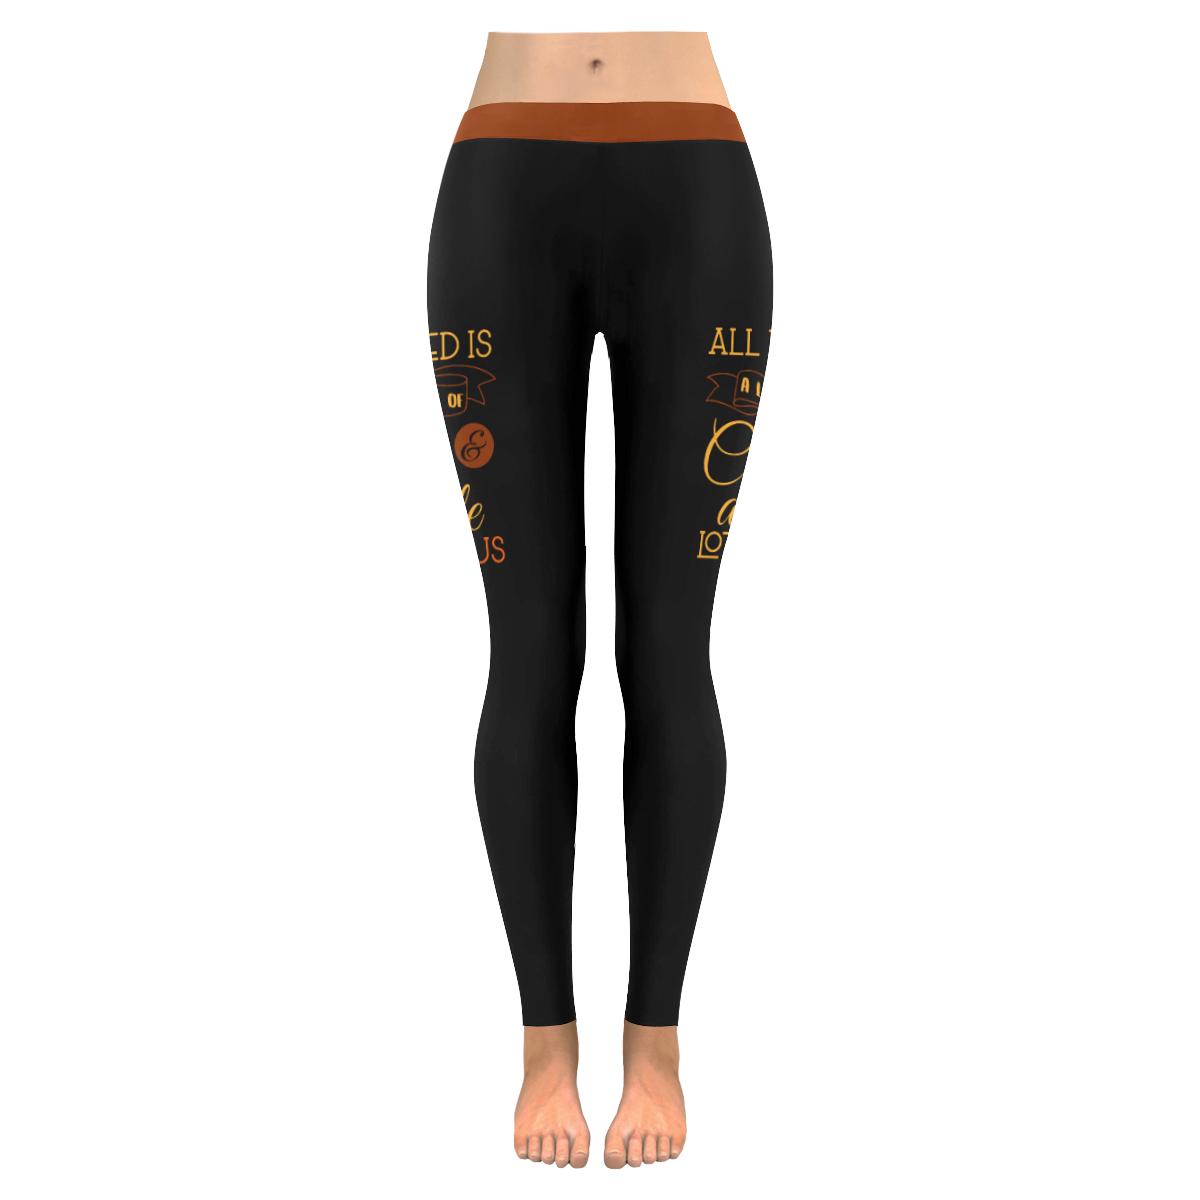 All I Need Is Coffee & A Whole Lot Of Jesus Soft Leggings For Women - Christian Leggings For Women